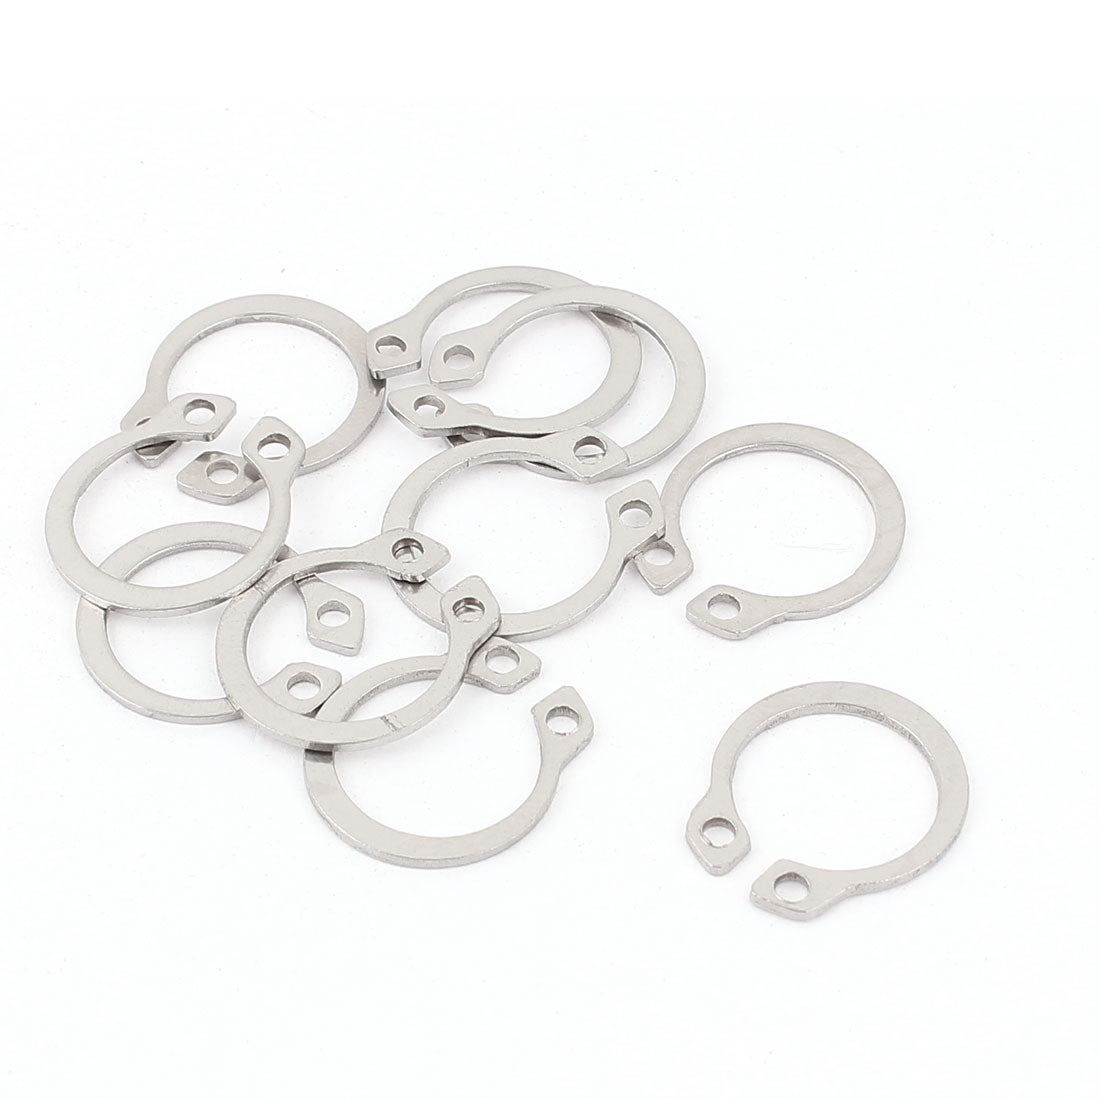 uxcell Uxcell 10pcs 304 Stainless Steel External Circlip Retaining Shaft Snap Rings 14mm